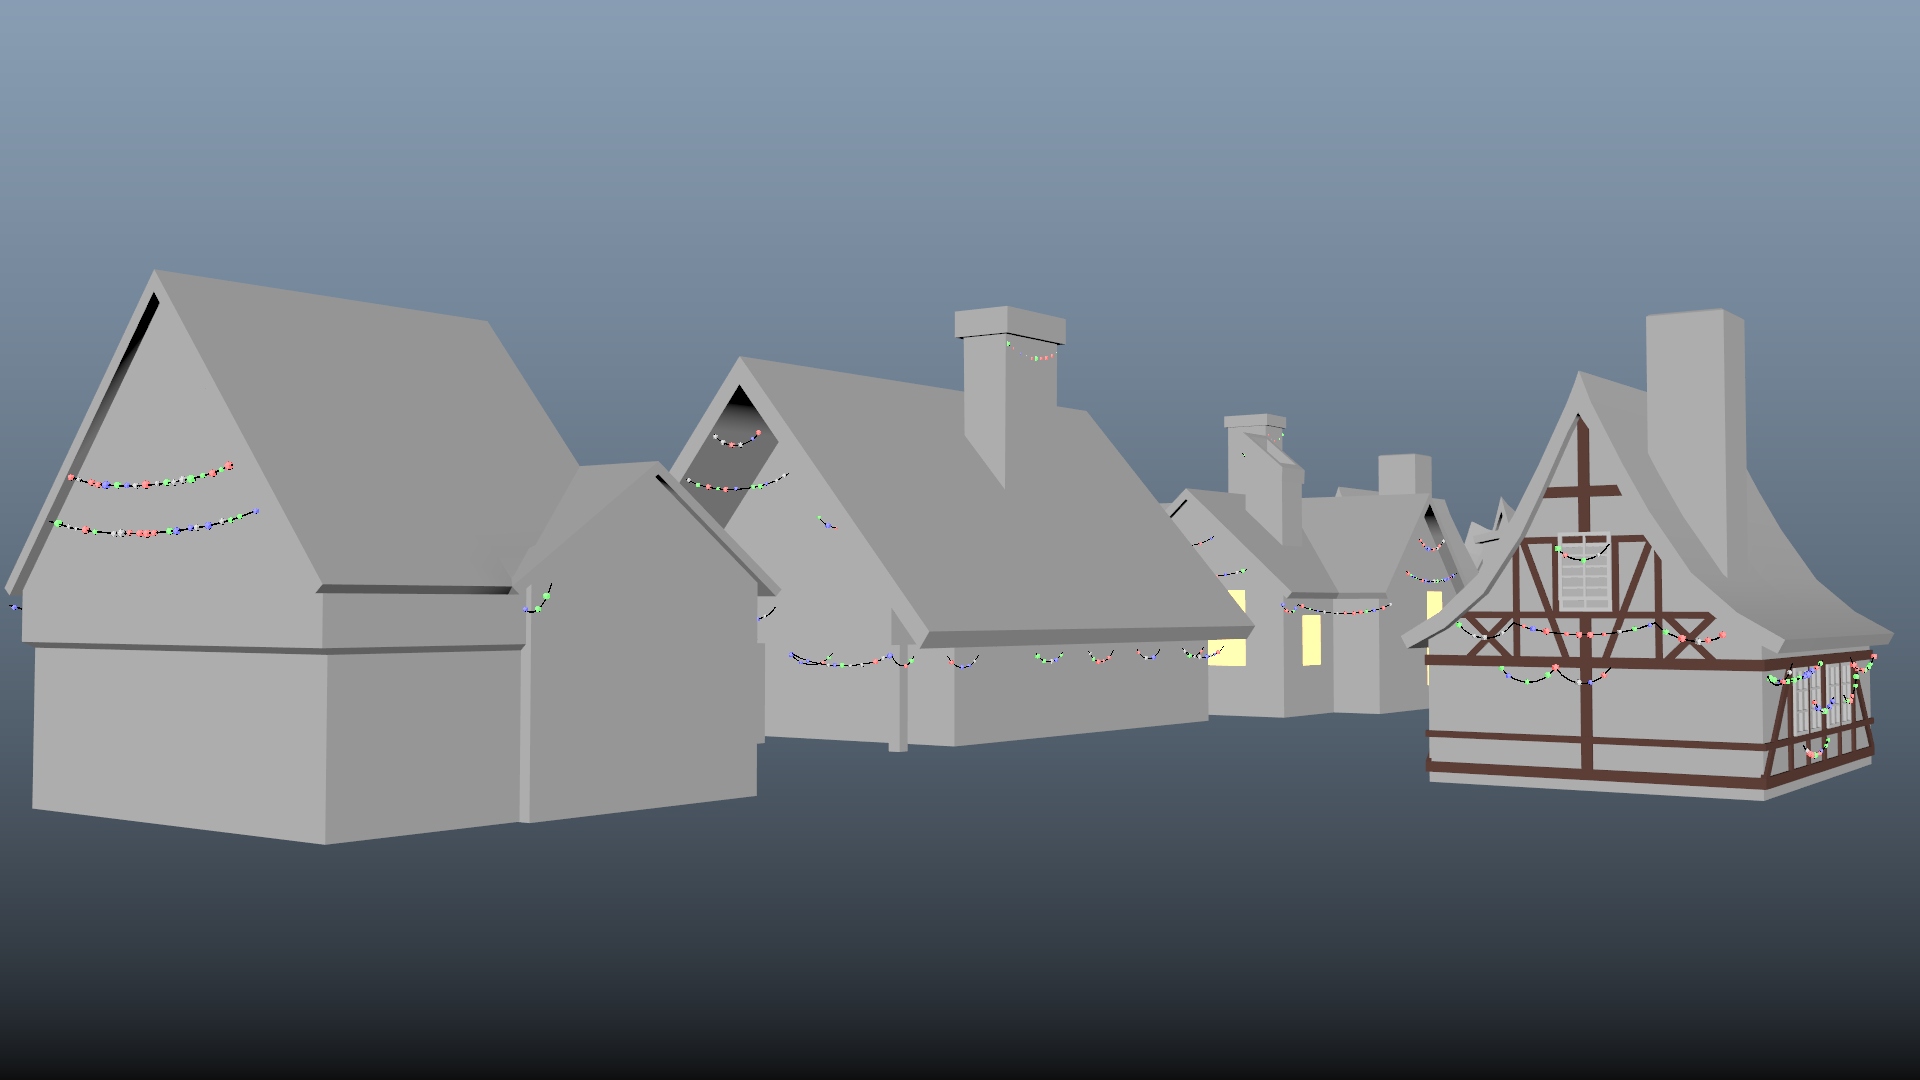 Several 3D model houses with chimneys decorated with fairy lights